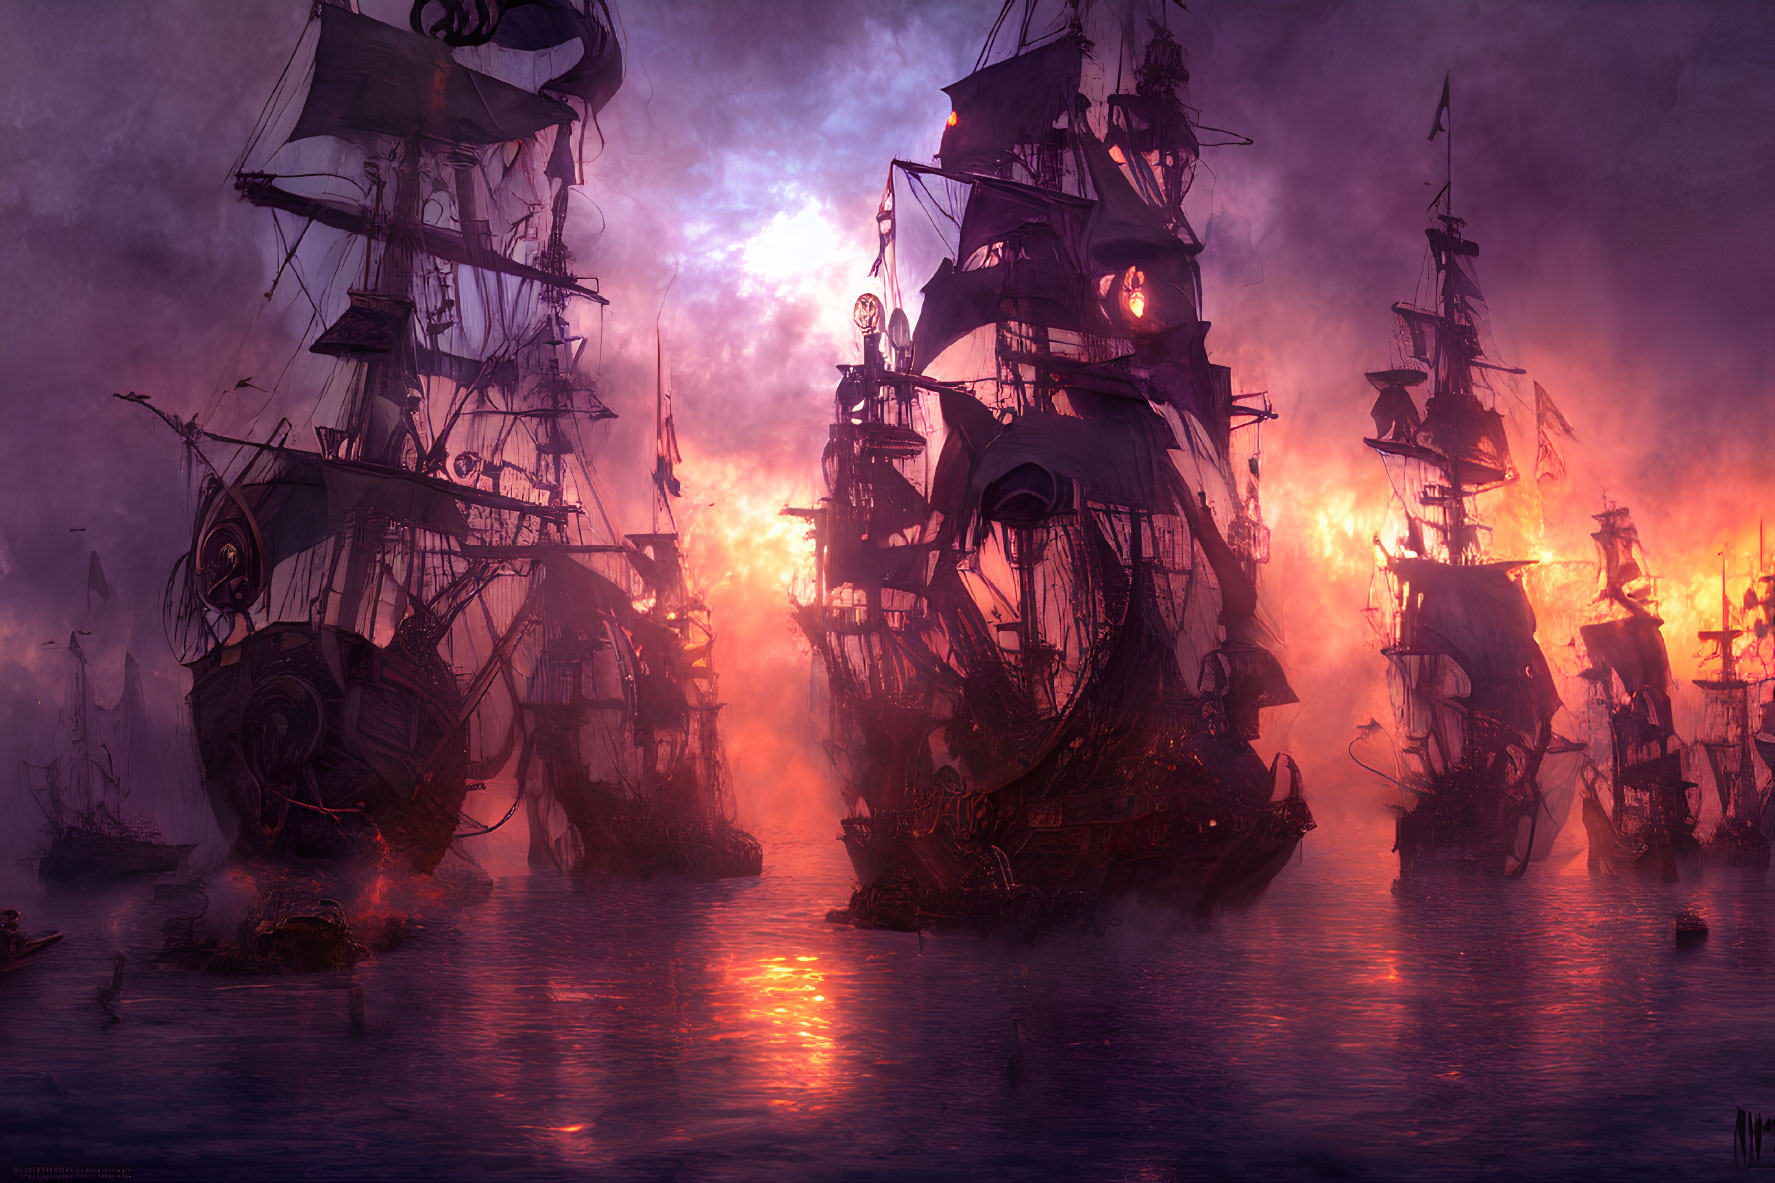 Tall ships in naval battle with fiery explosions at dusk